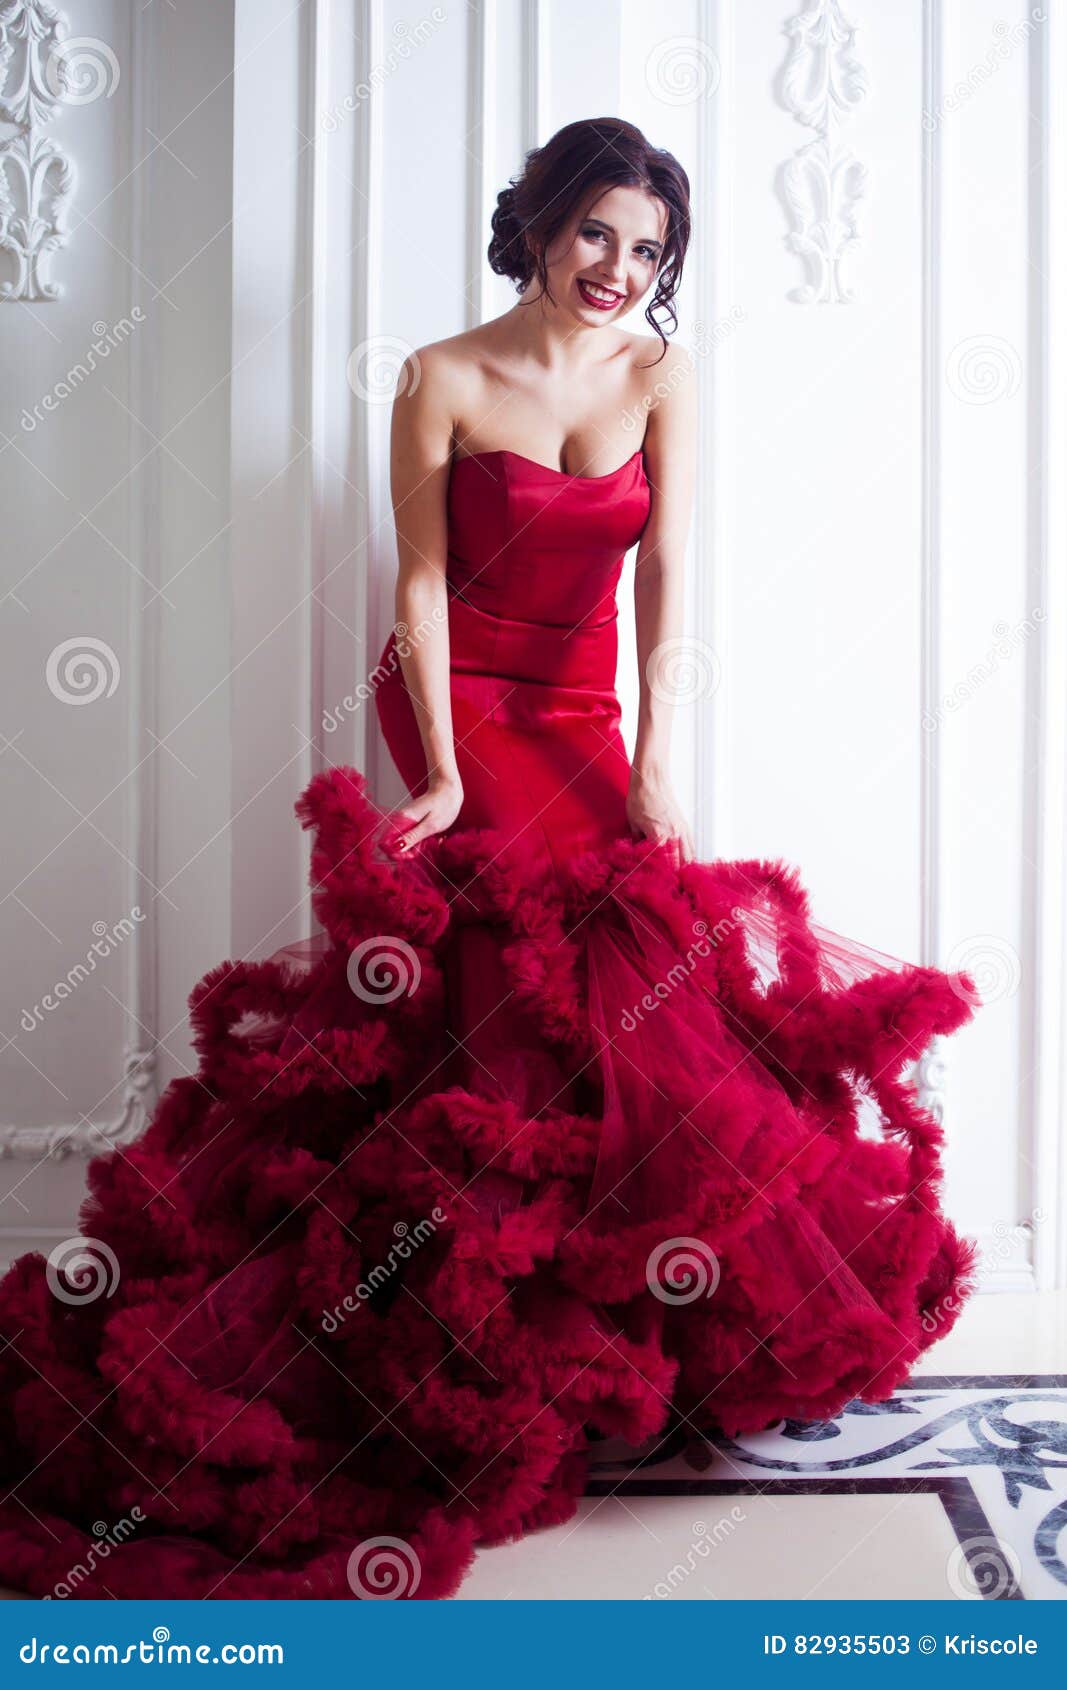 30+ Model In A Red Gown And Crown On Her Head Stock Photos, Pictures &  Royalty-Free Images - iStock